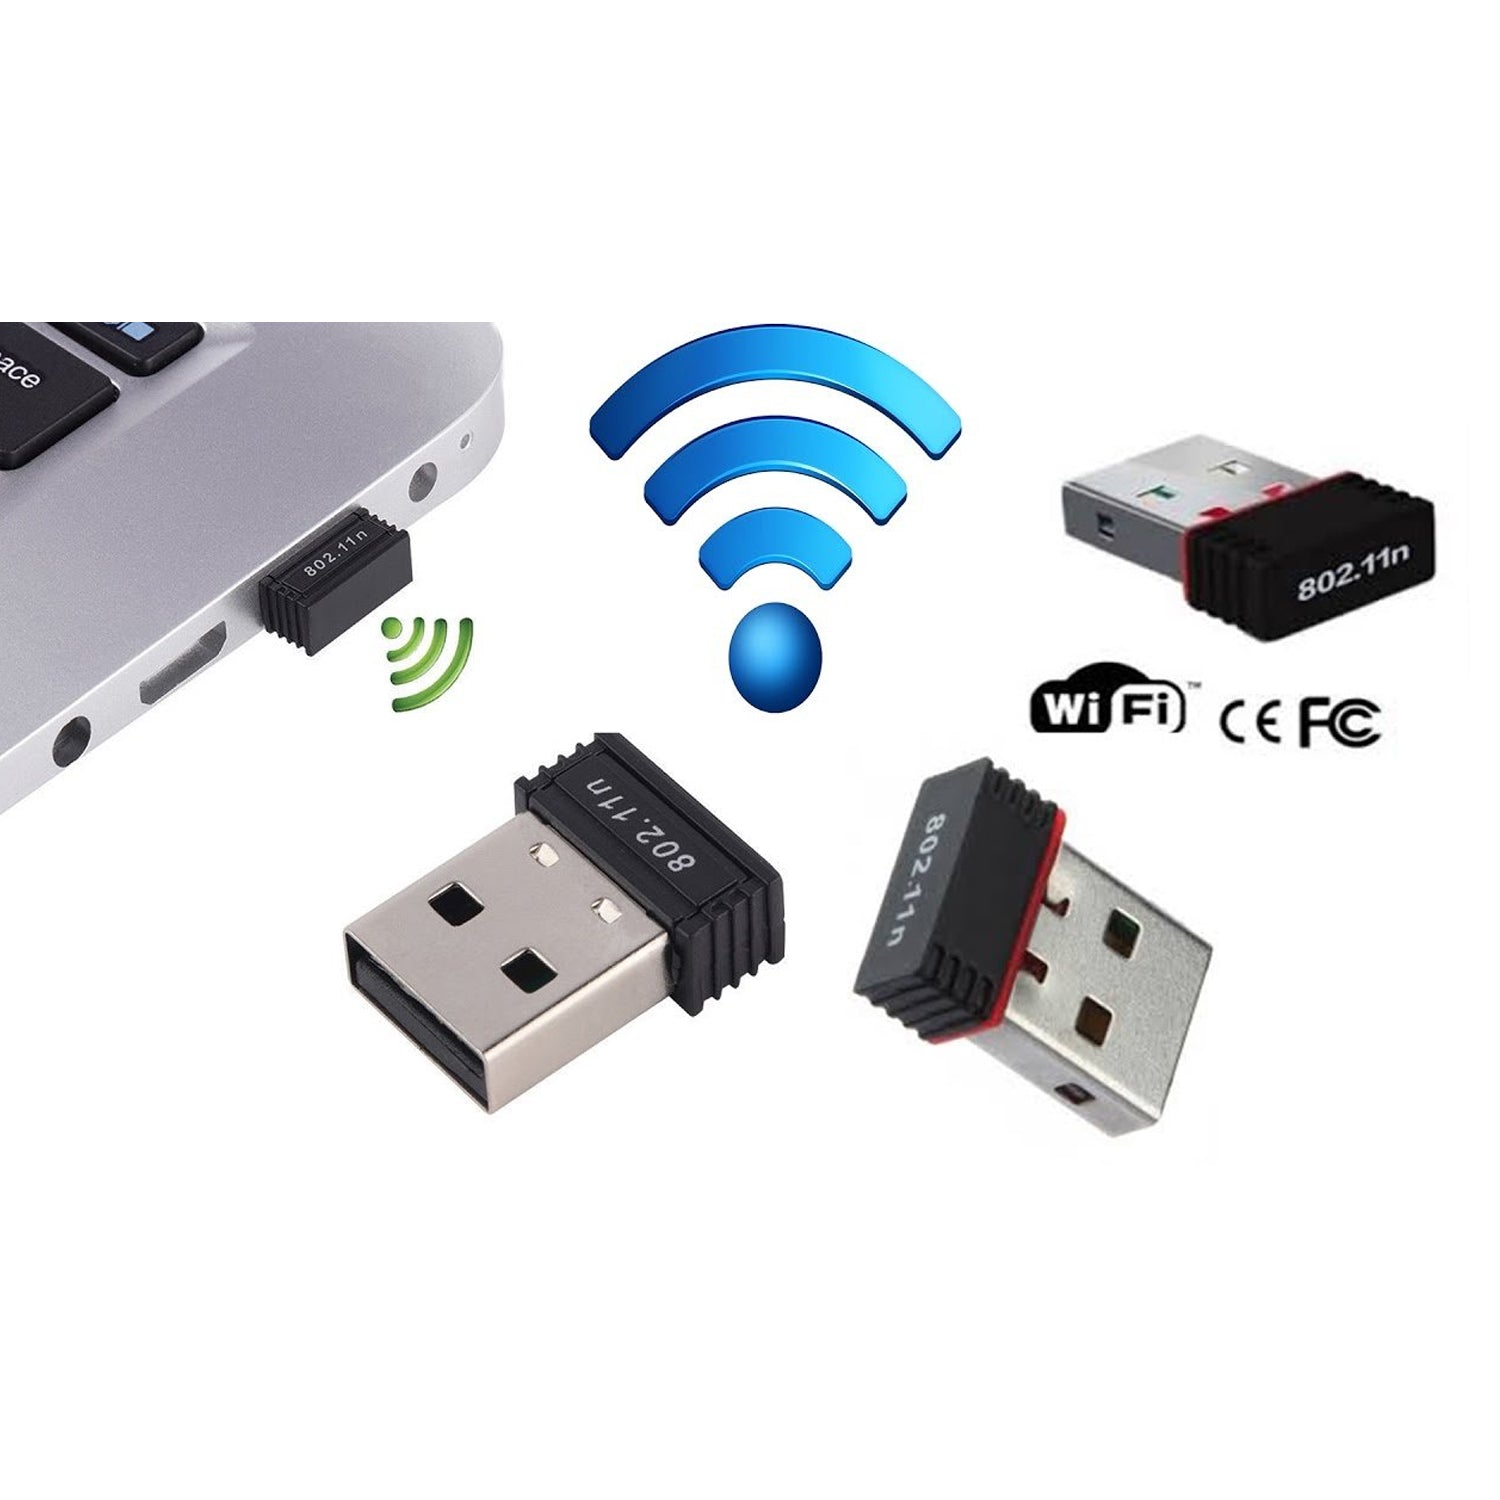 7224 Wi-Fi Receiver Wireless Mini Wi-Fi Network Adapter with with Driver Cd For Computer & Laptop And Etc Device Use Dukandaily